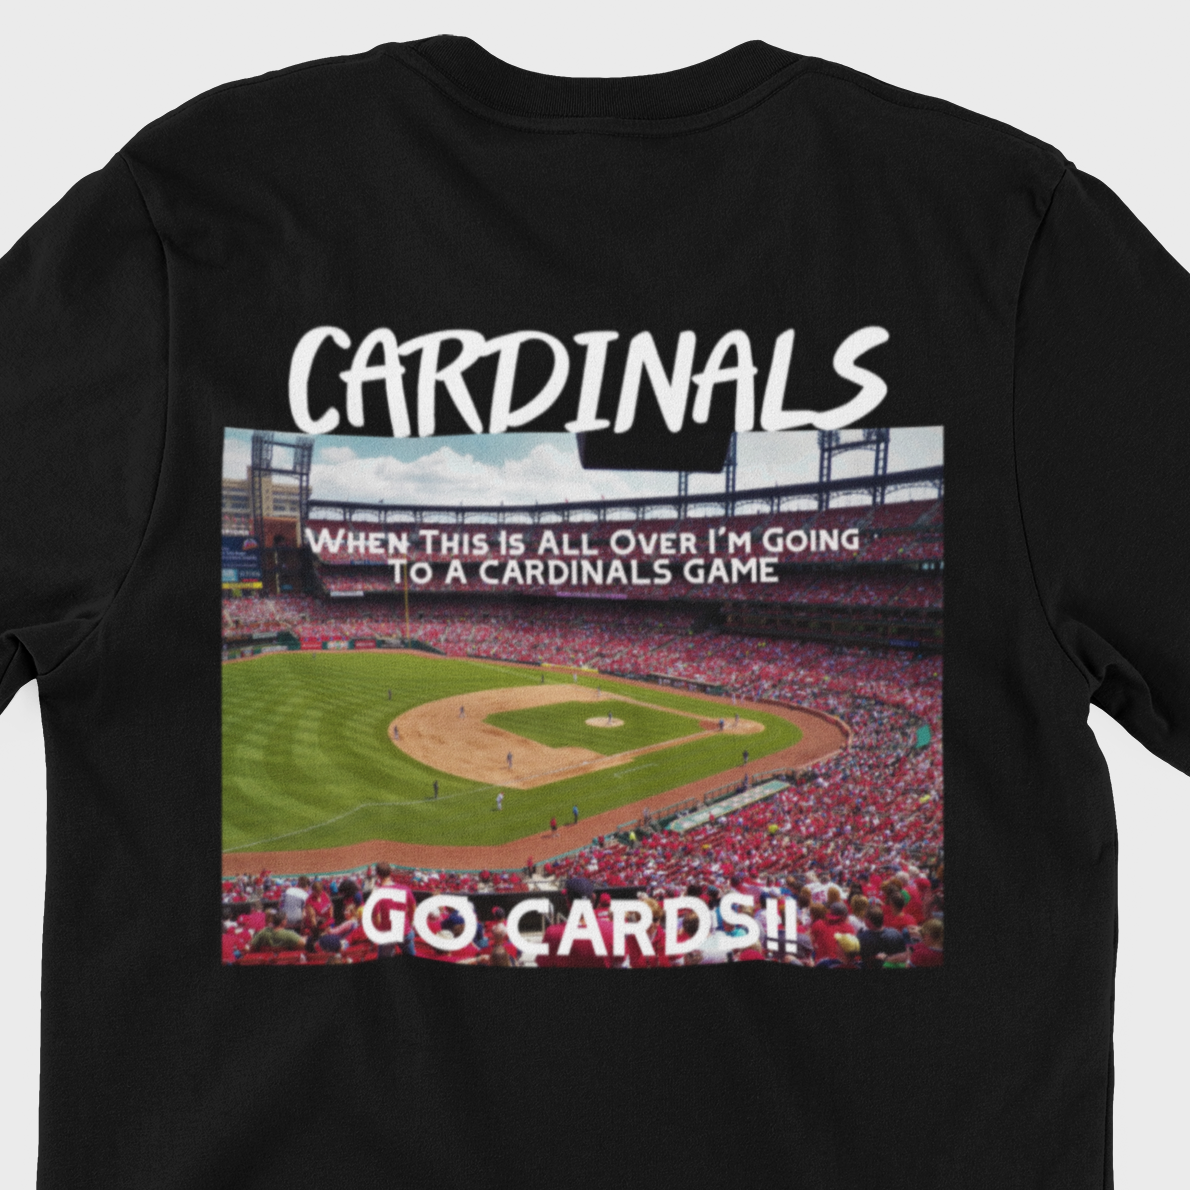 St. Louis CARDINALS shirt When This Is All Over I'm Going To A Cardinals Game GO CARDS!! T-shirt